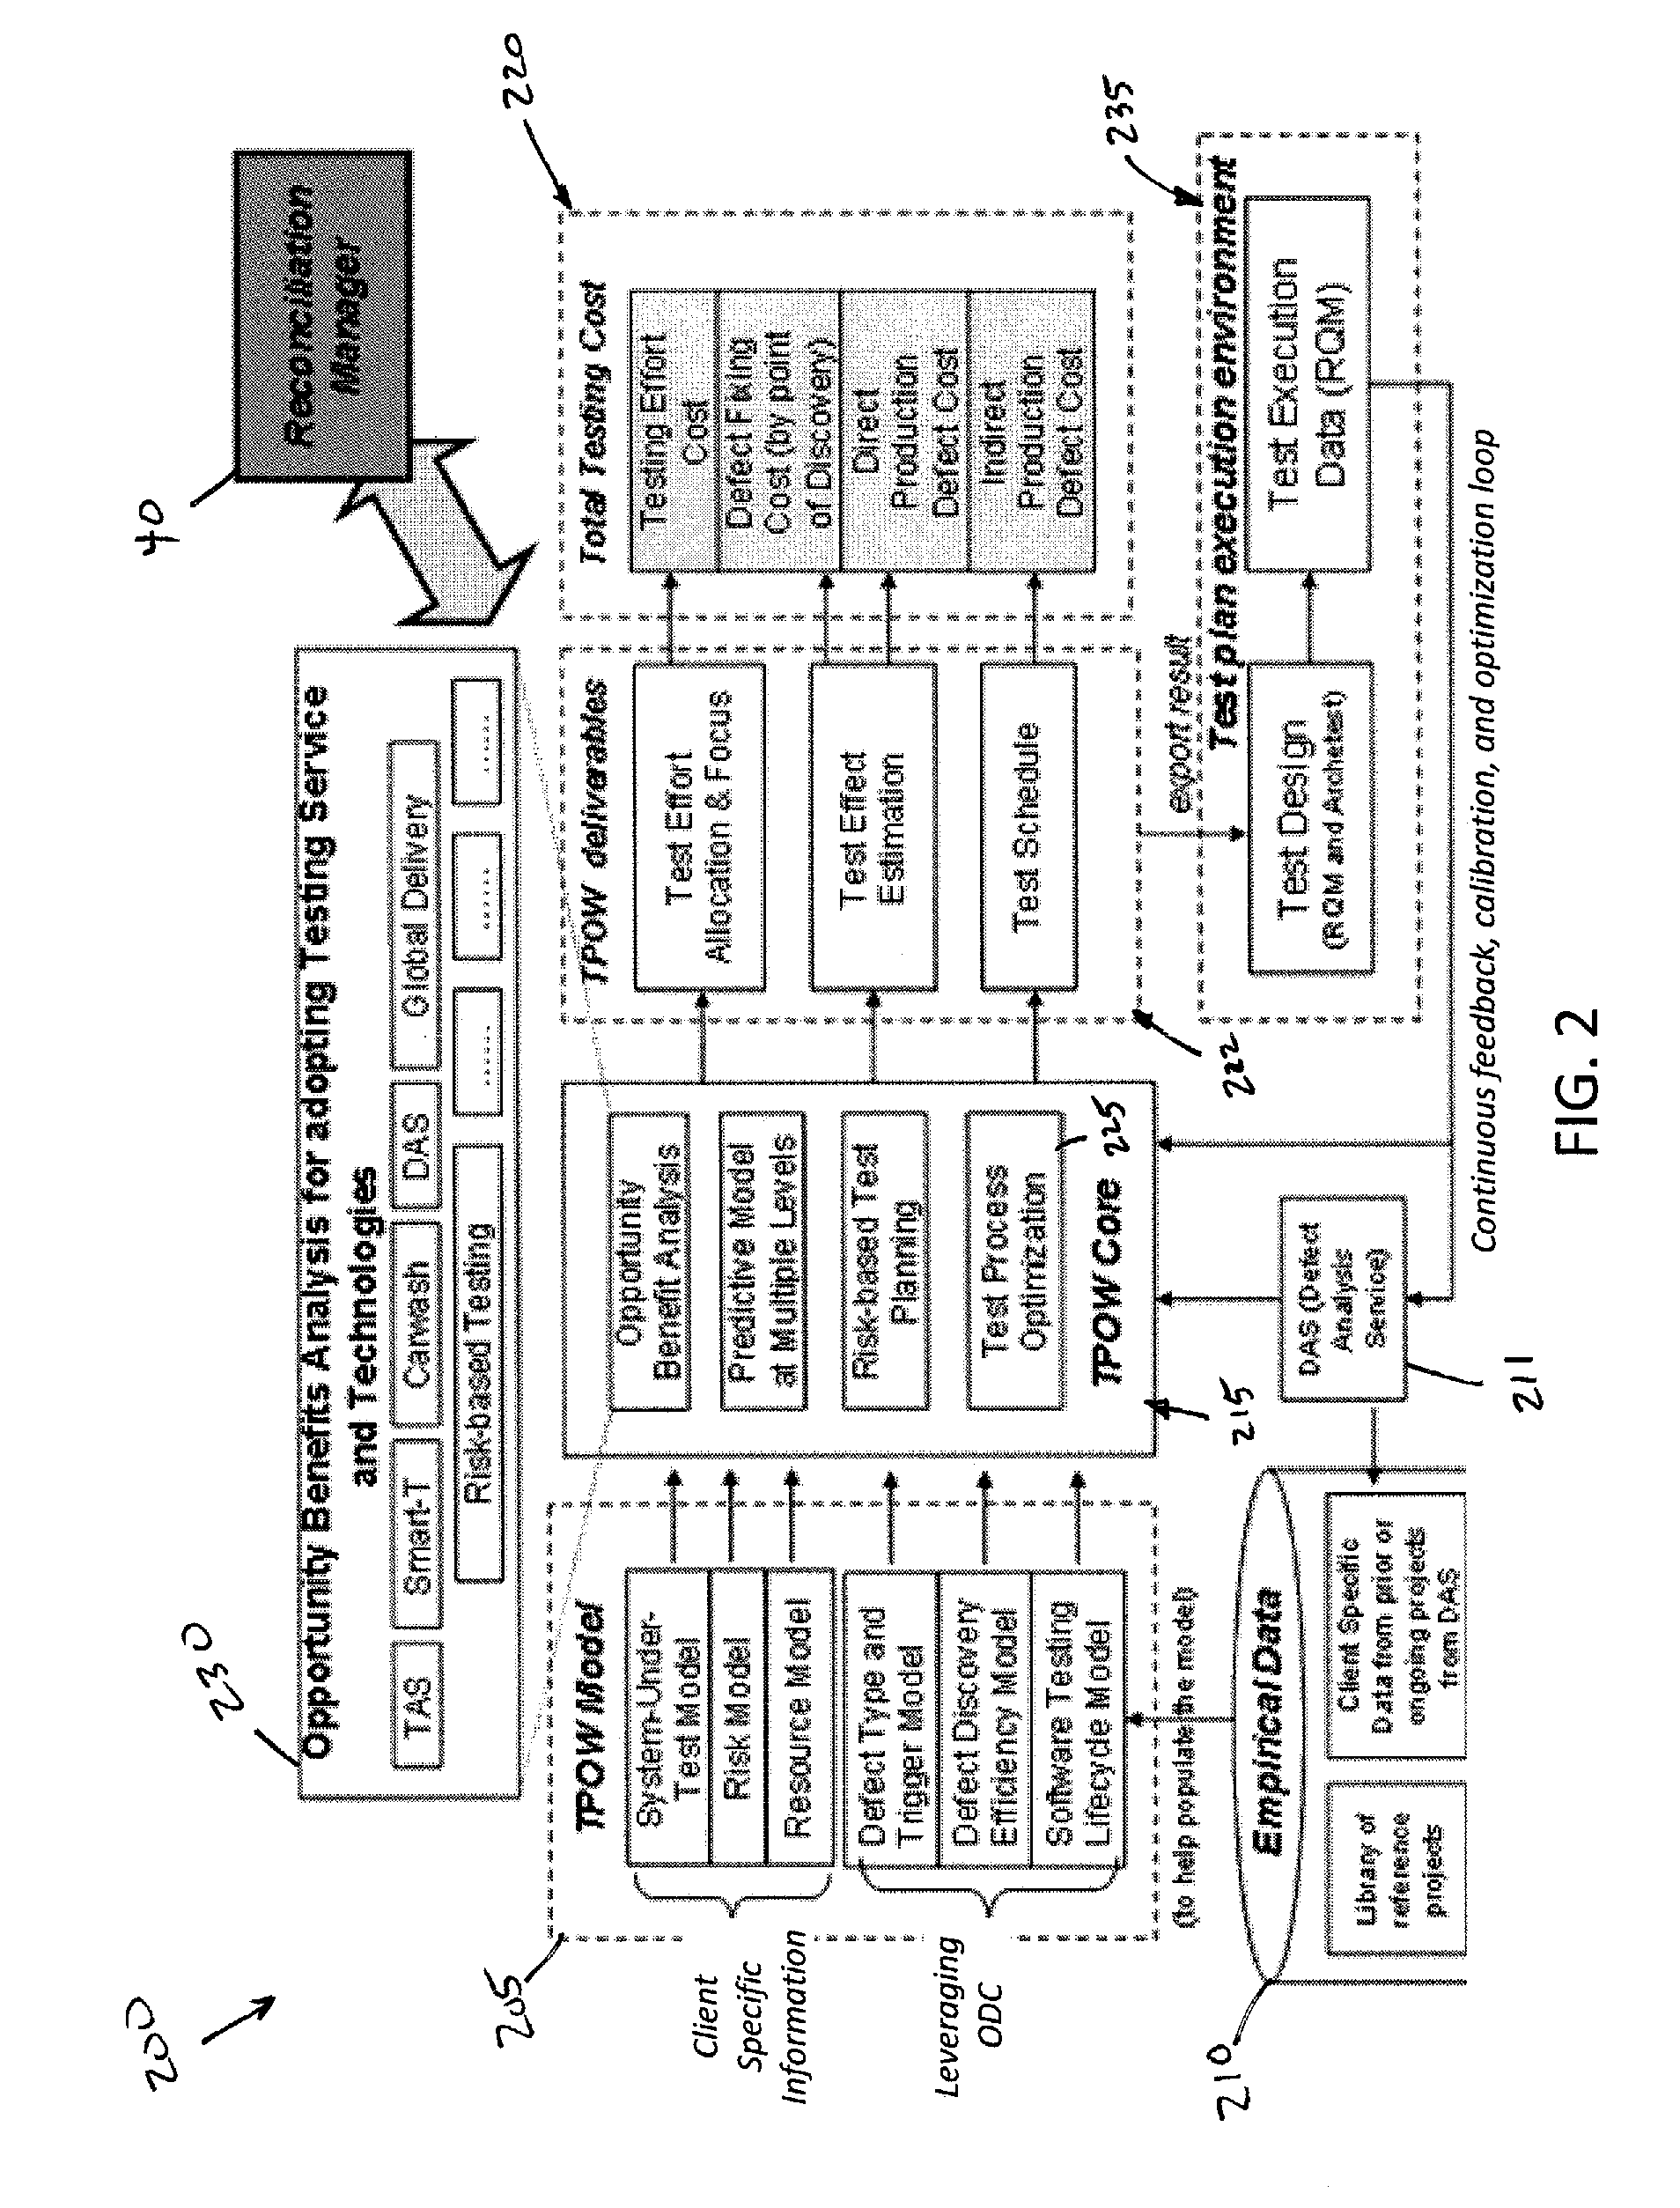 System and method for efficient creation and reconciliation of macro and micro level test plans